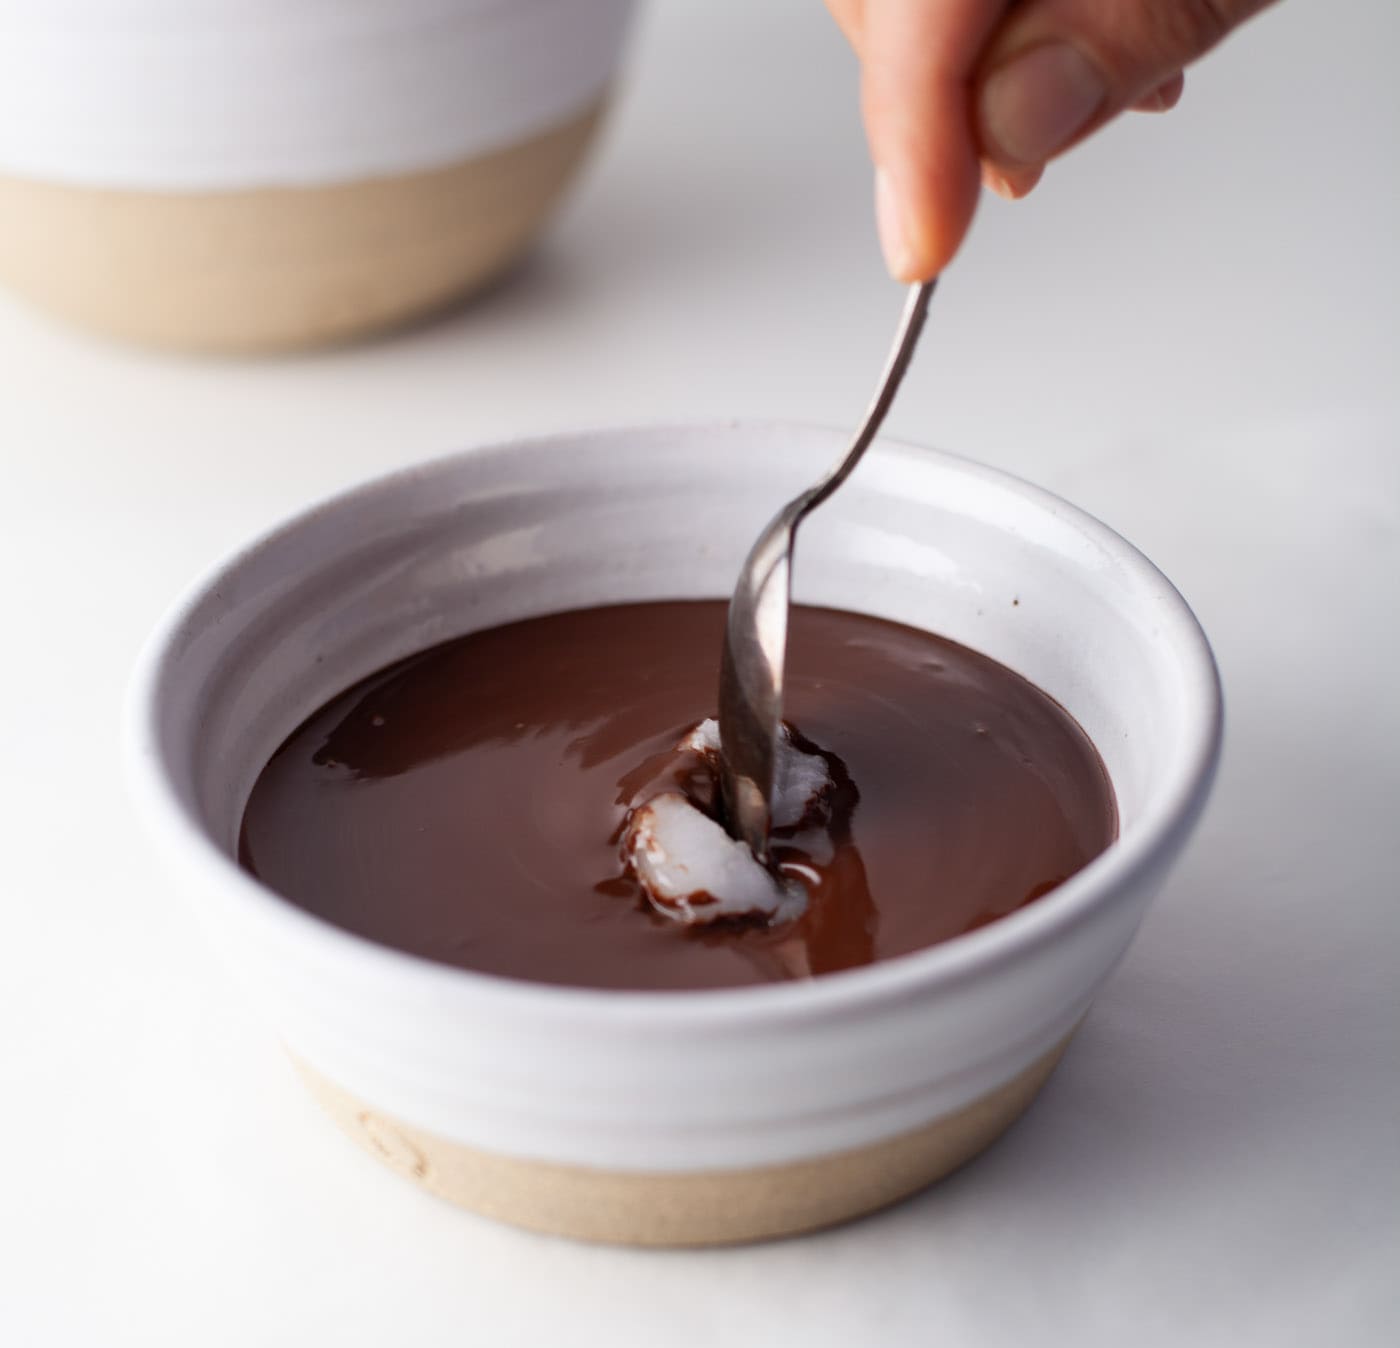 stirring coconut oil into melted chocolate